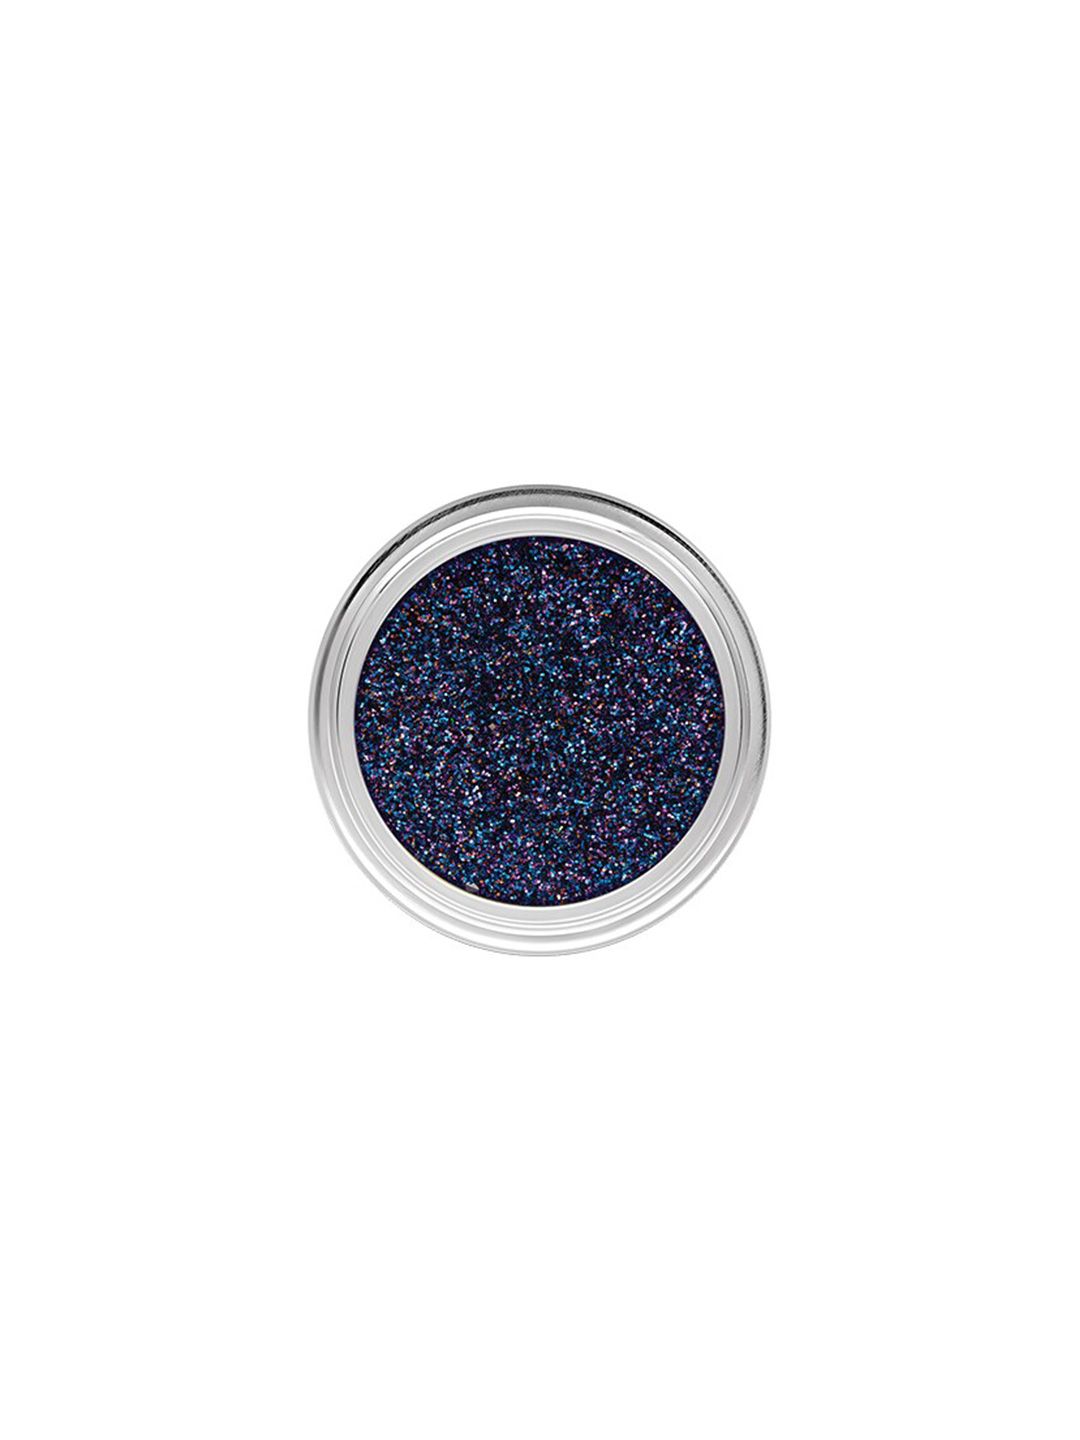 C2P PROFESSIONAL MAKEUP Uptown Loose Glitters Eyeshadow - Remix 70 Price in India